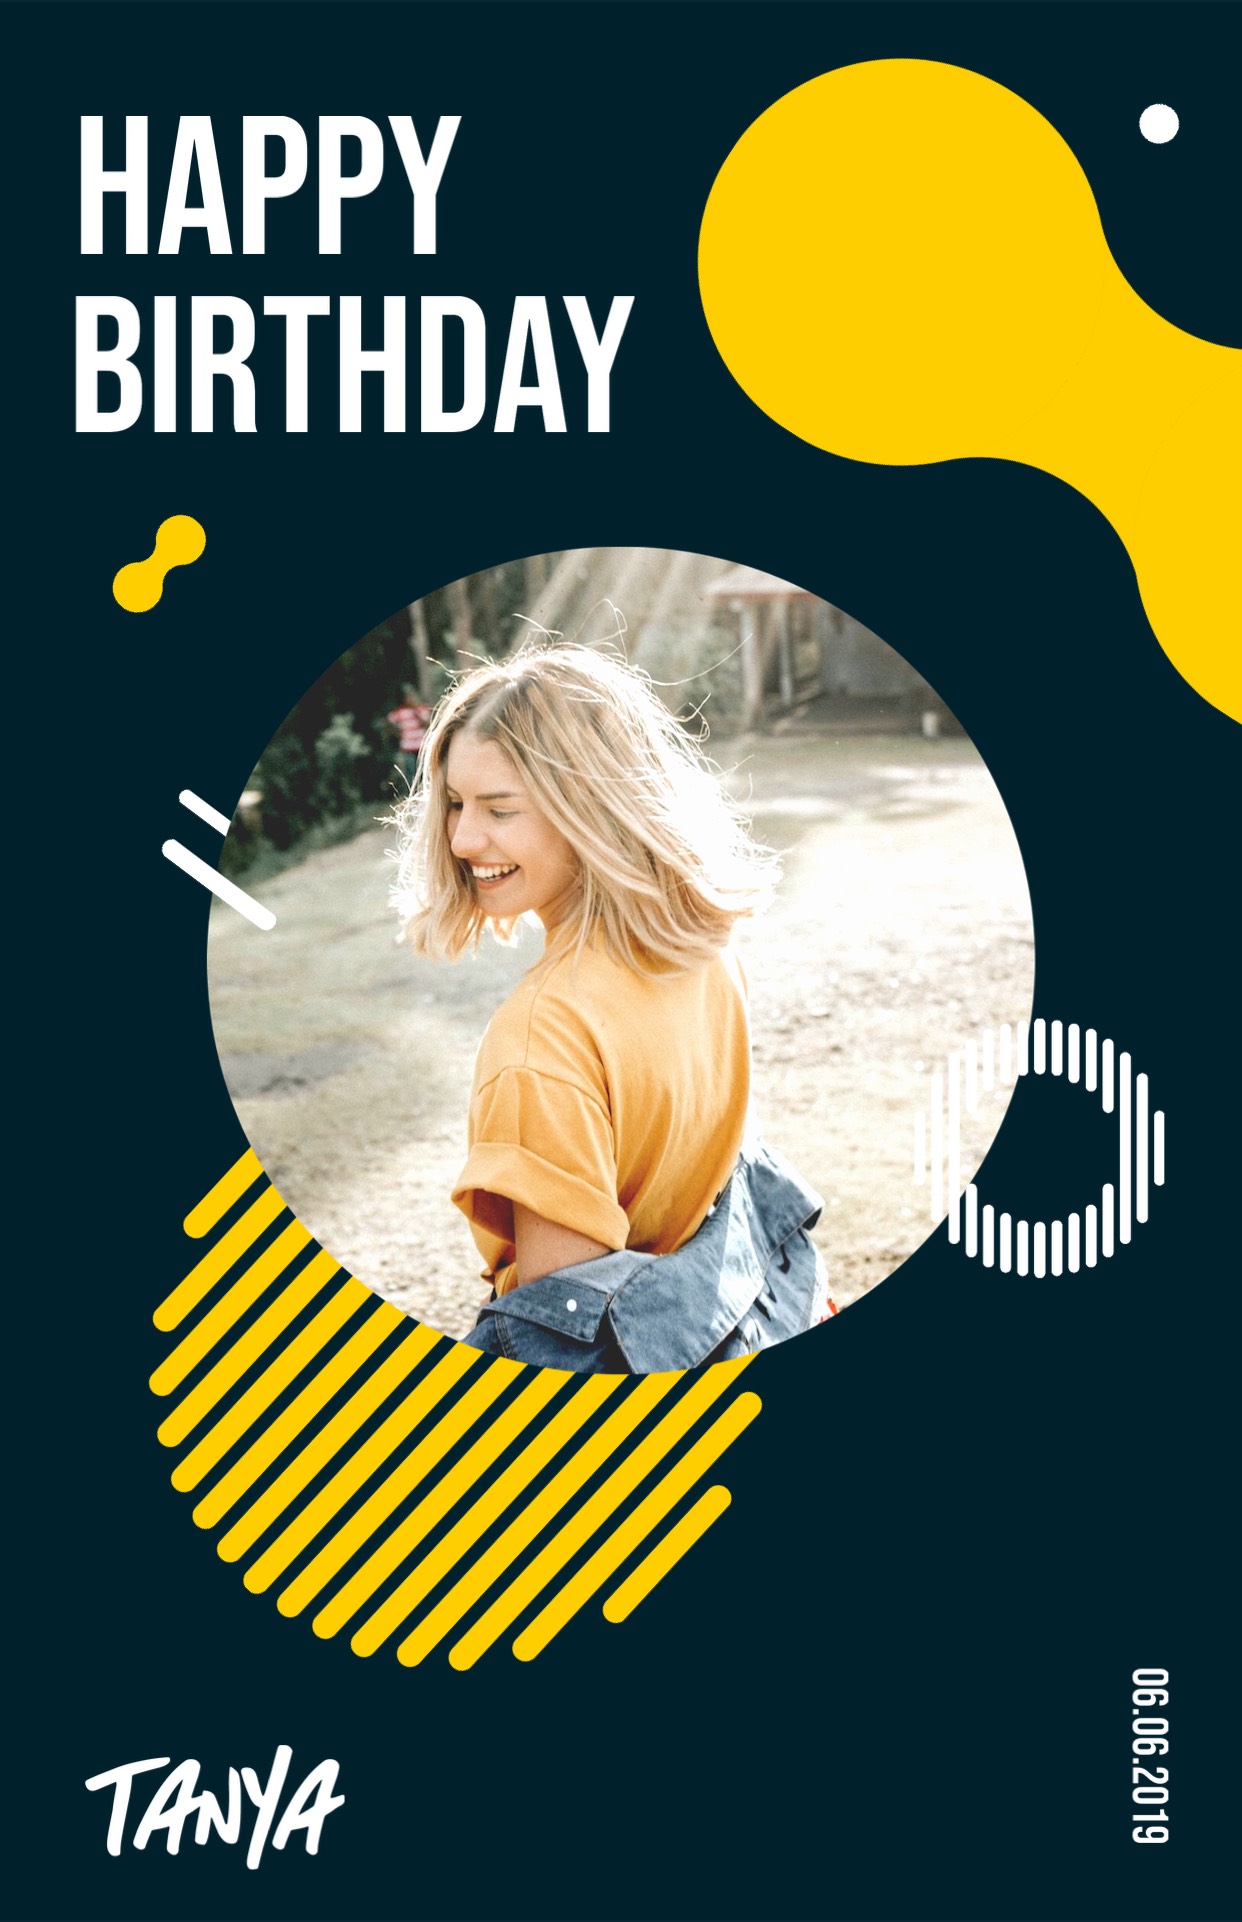 Woman smiling happy birthday abstract template